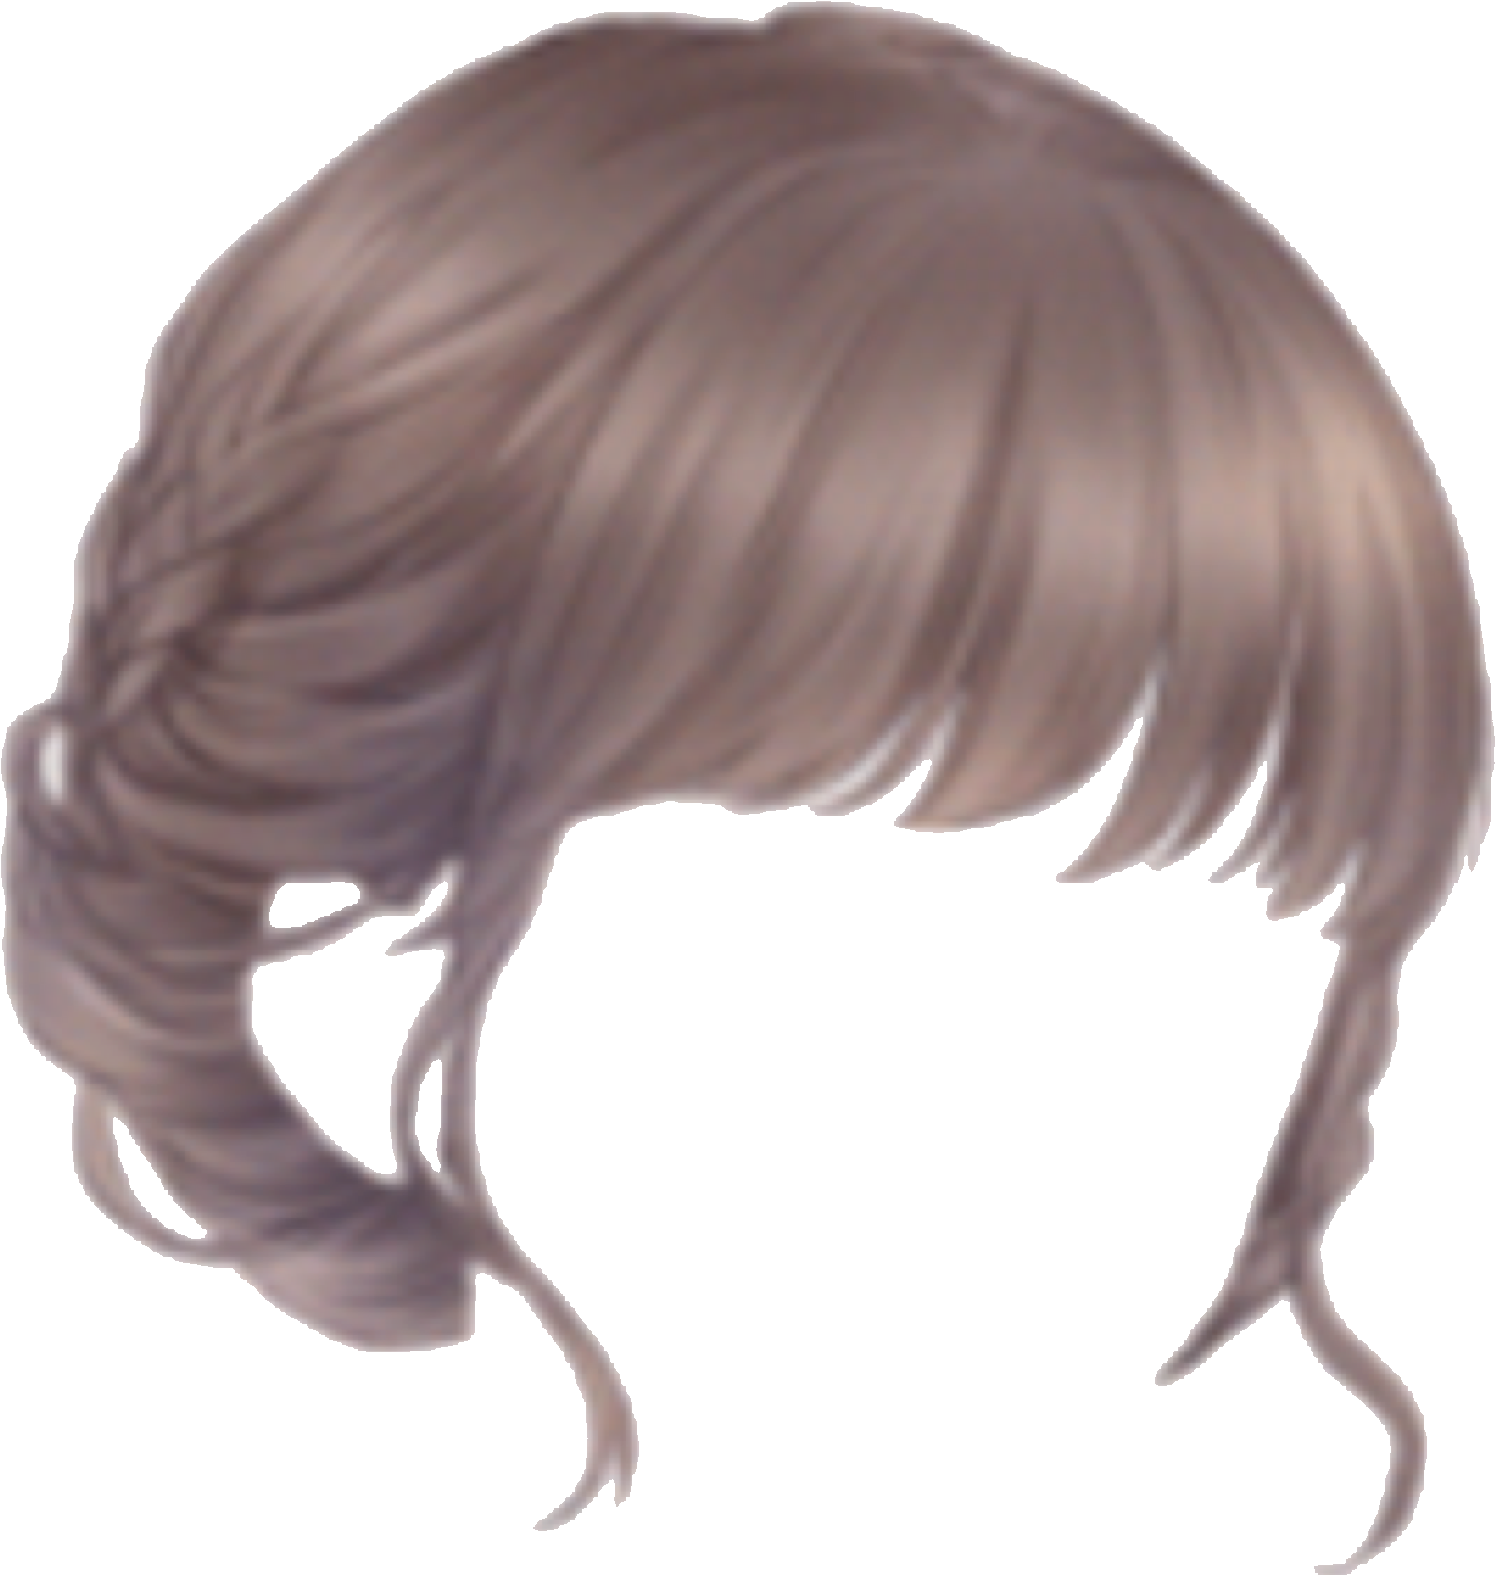 Girl Hairstyle PNG Image High Quality PNG Image